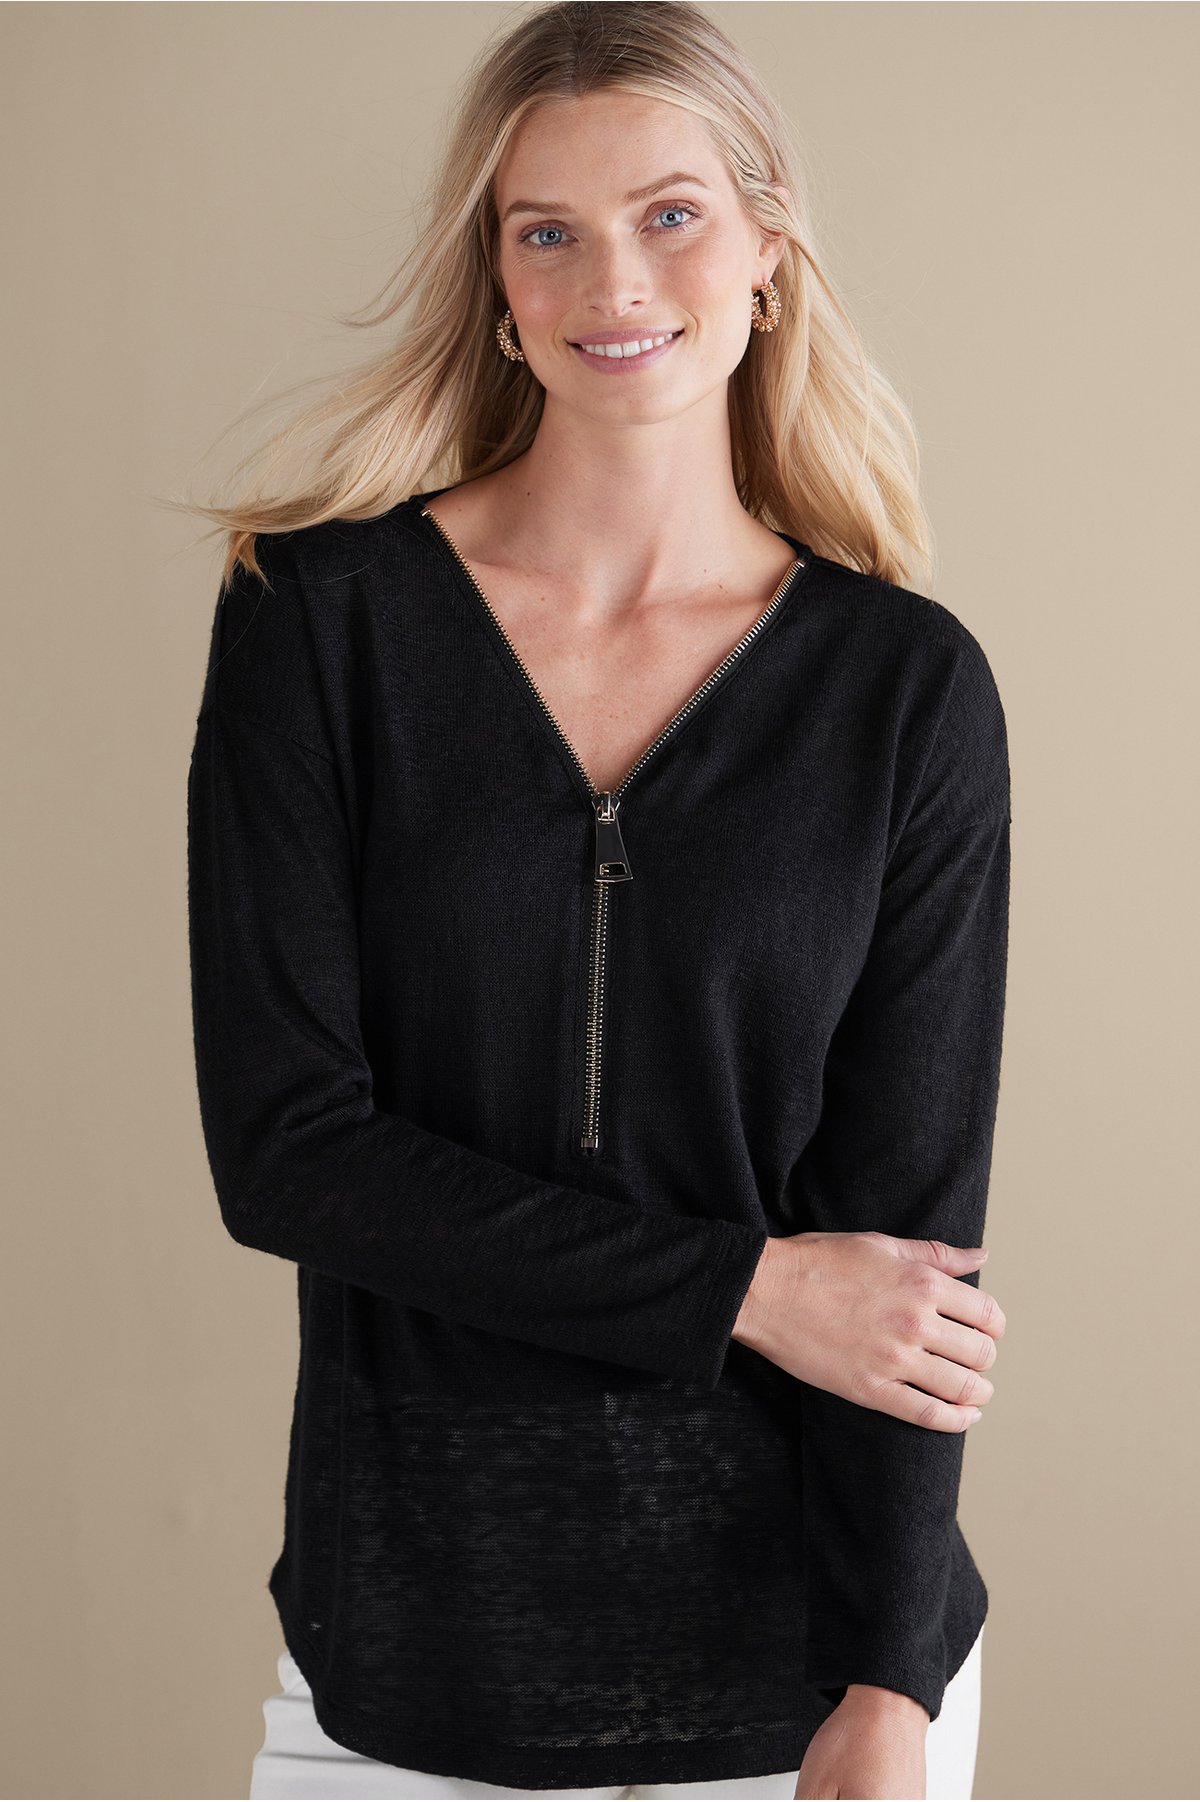 Women's Valentina Zip Sweater by Soft Surroundings, in Black size L (14-16)